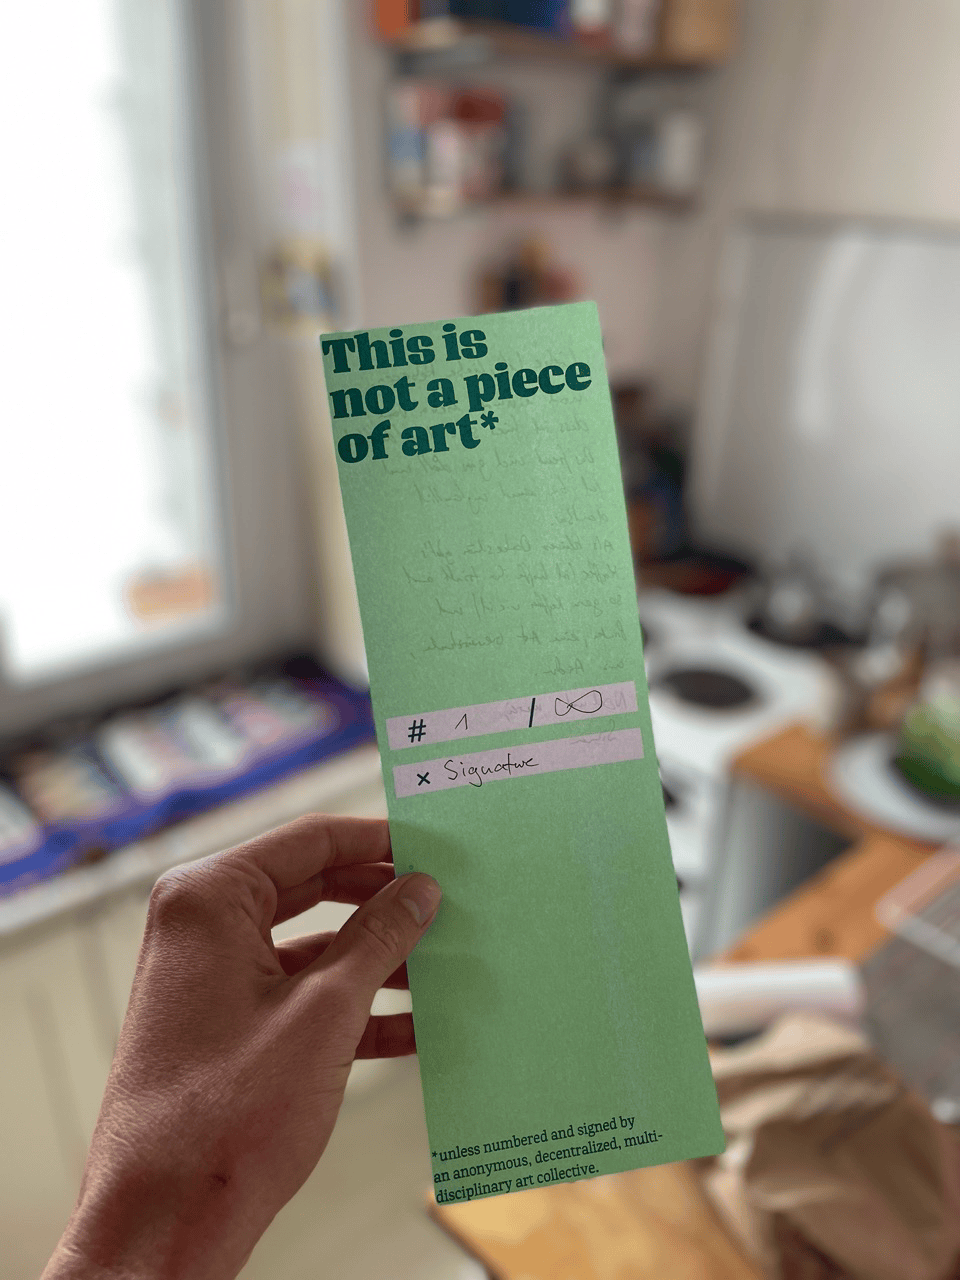 A photo of my hand holding a green, riso-printed piece of art. It reads: »This is not a piece of art*«. In the center there is room to be signed and numbered. At the bottom it reads: »*unless numbered and signed by an anonymous, decentralized, multidisciplinary art collective.«.